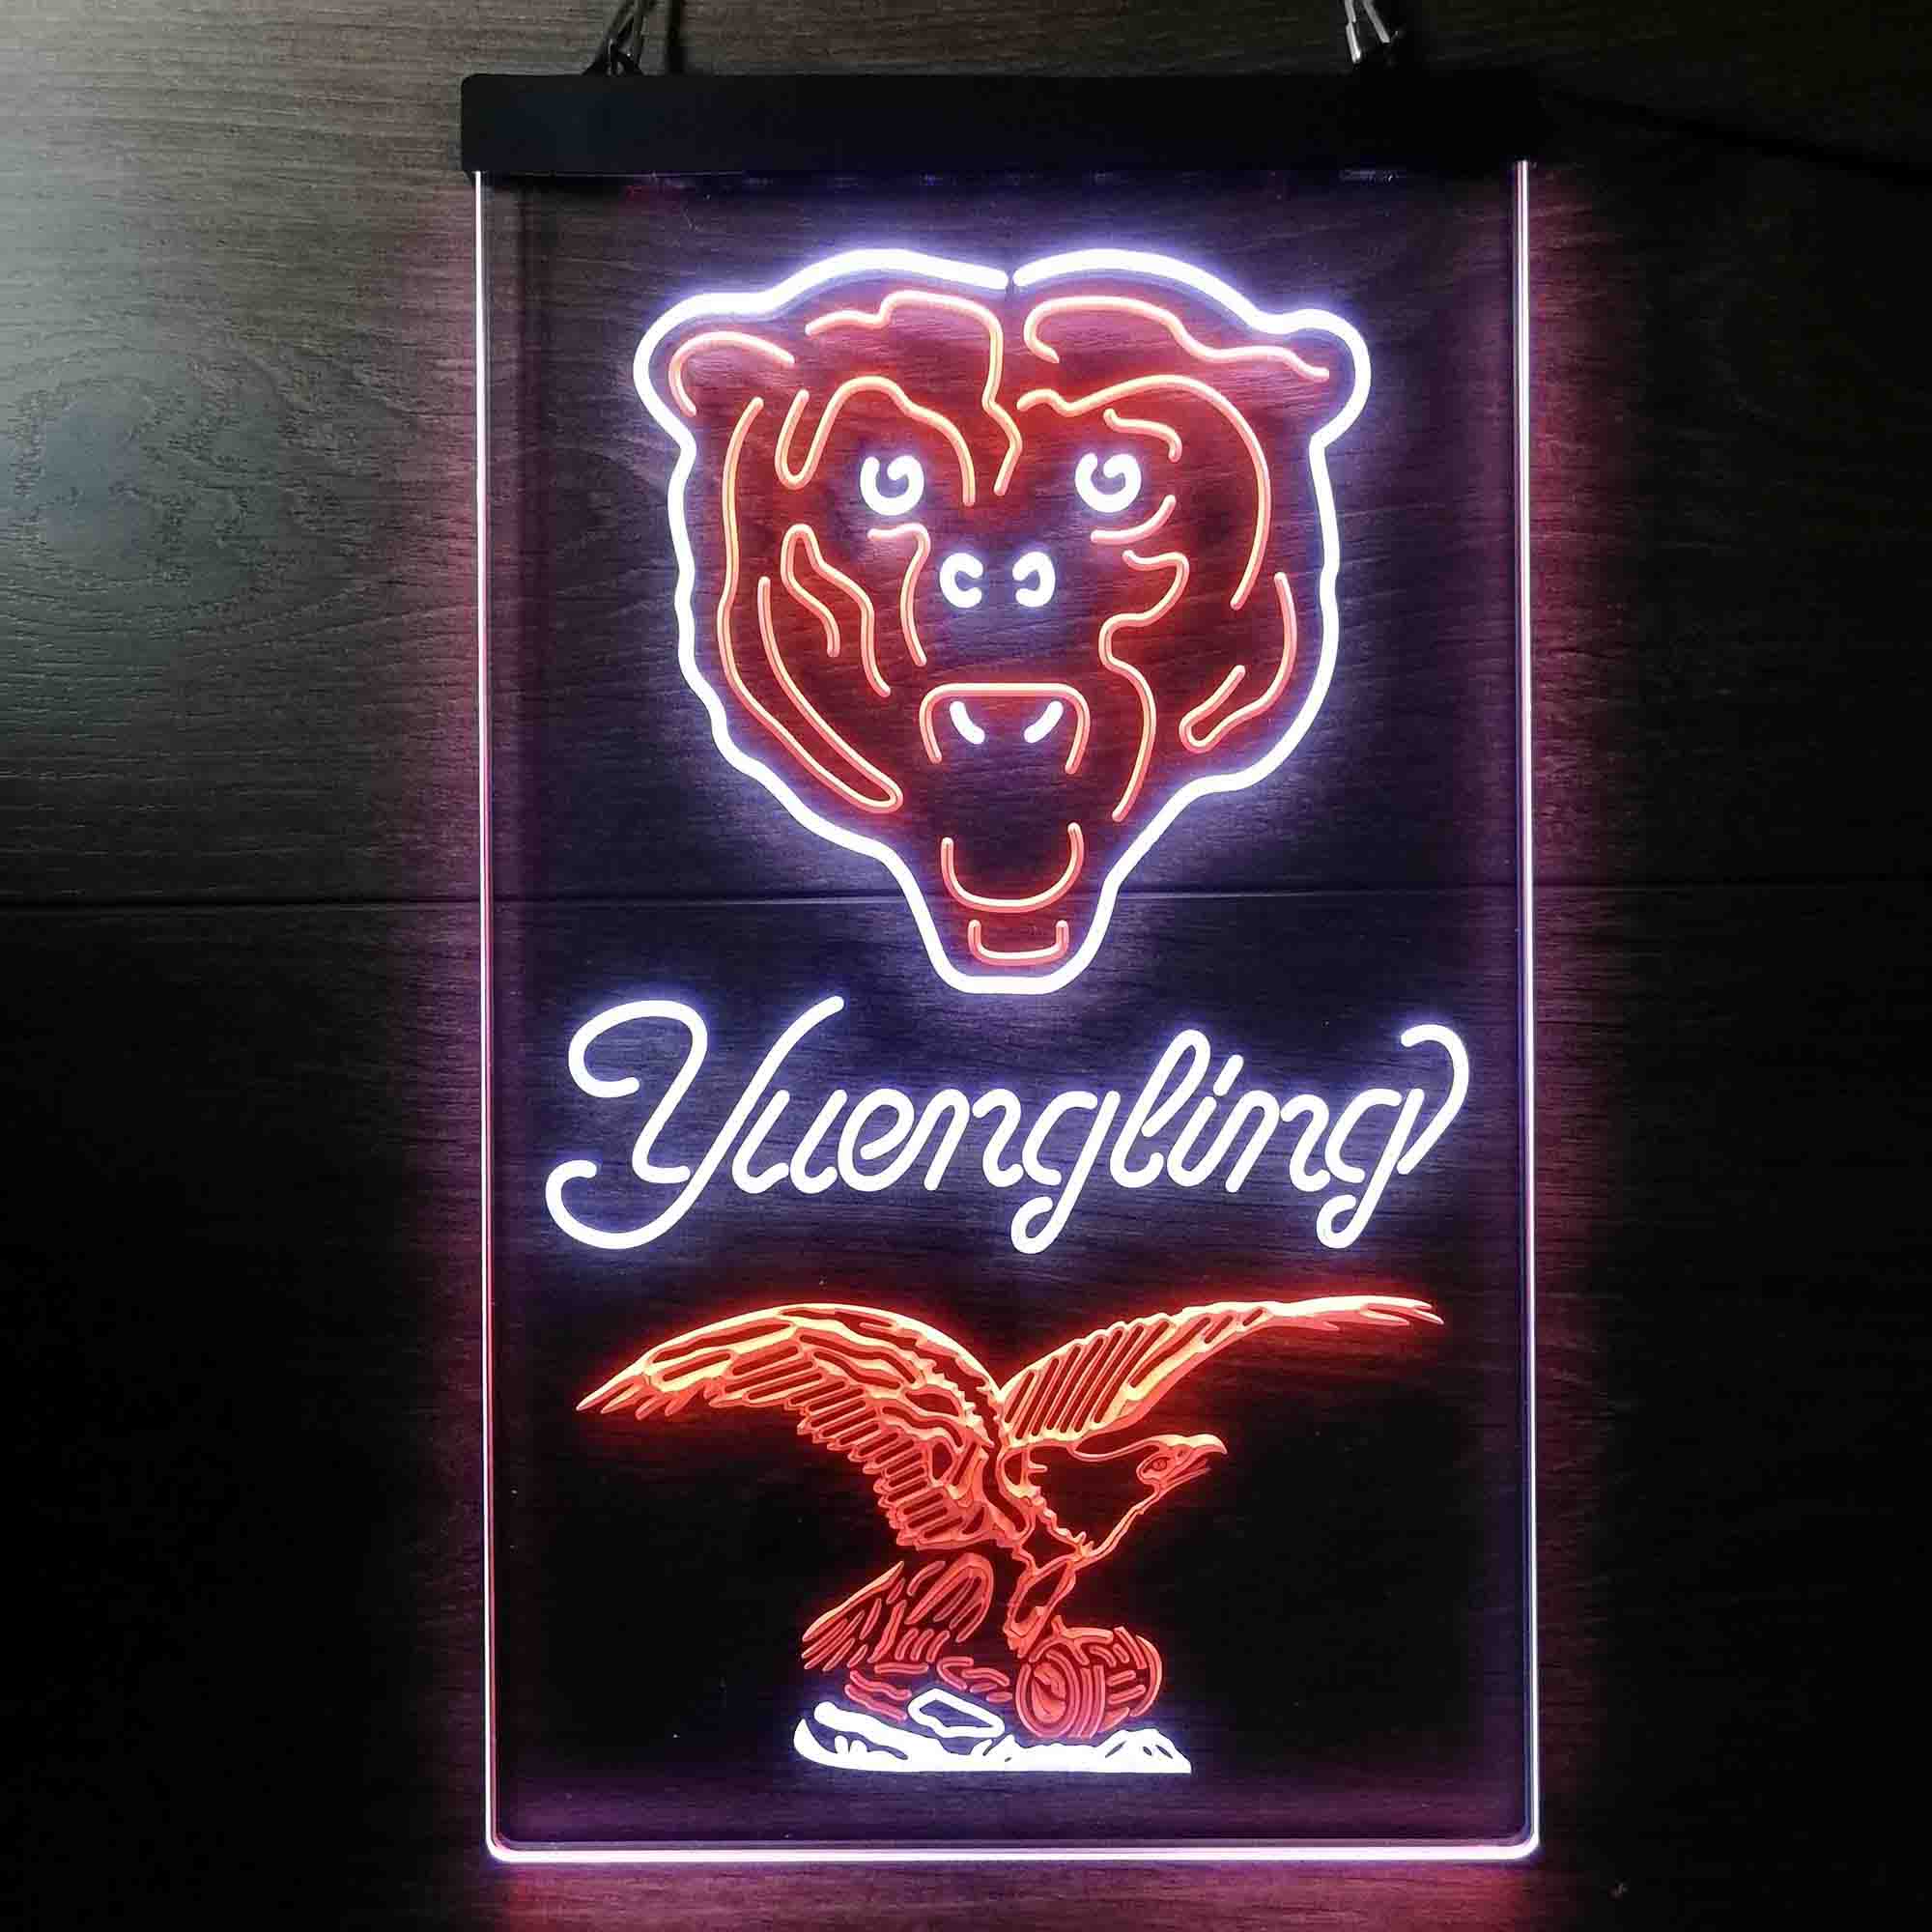 Yuengling Bar Chicago Bears Est. 1920 LED Neon Sign